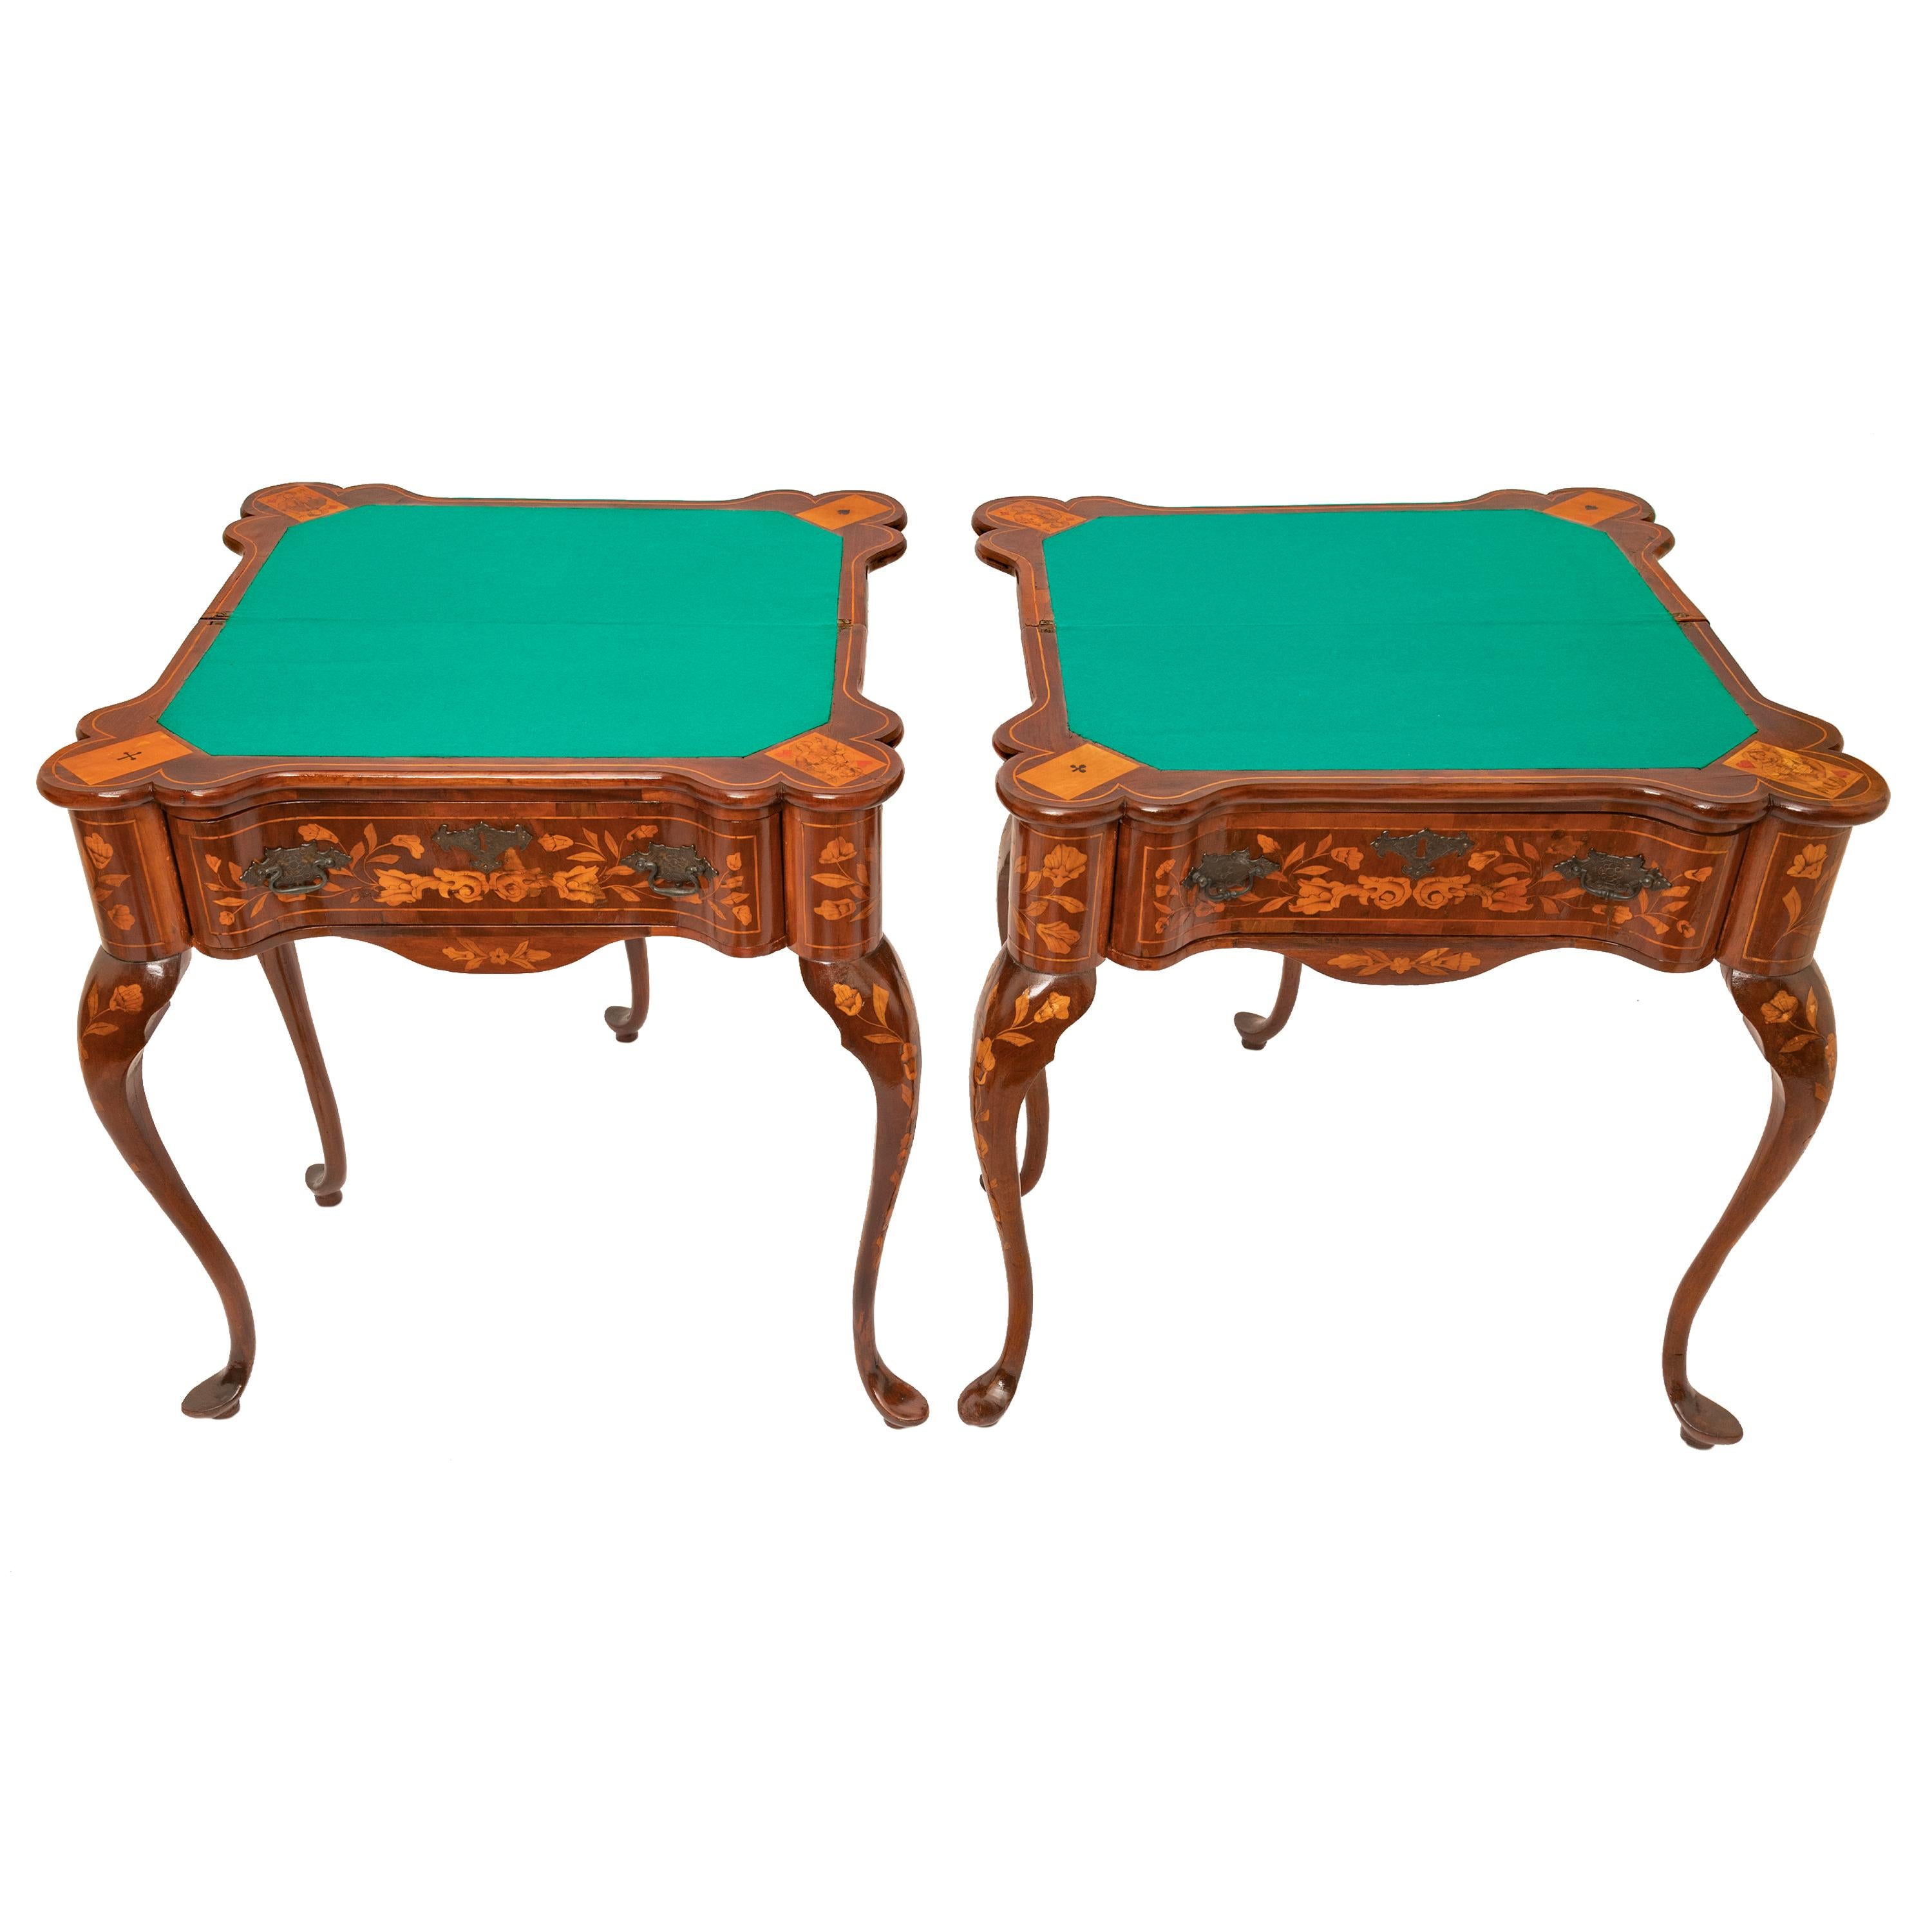 Pair Antique 19th Century Dutch Walnut Marquetry Card Game Console Tables 1820 For Sale 2